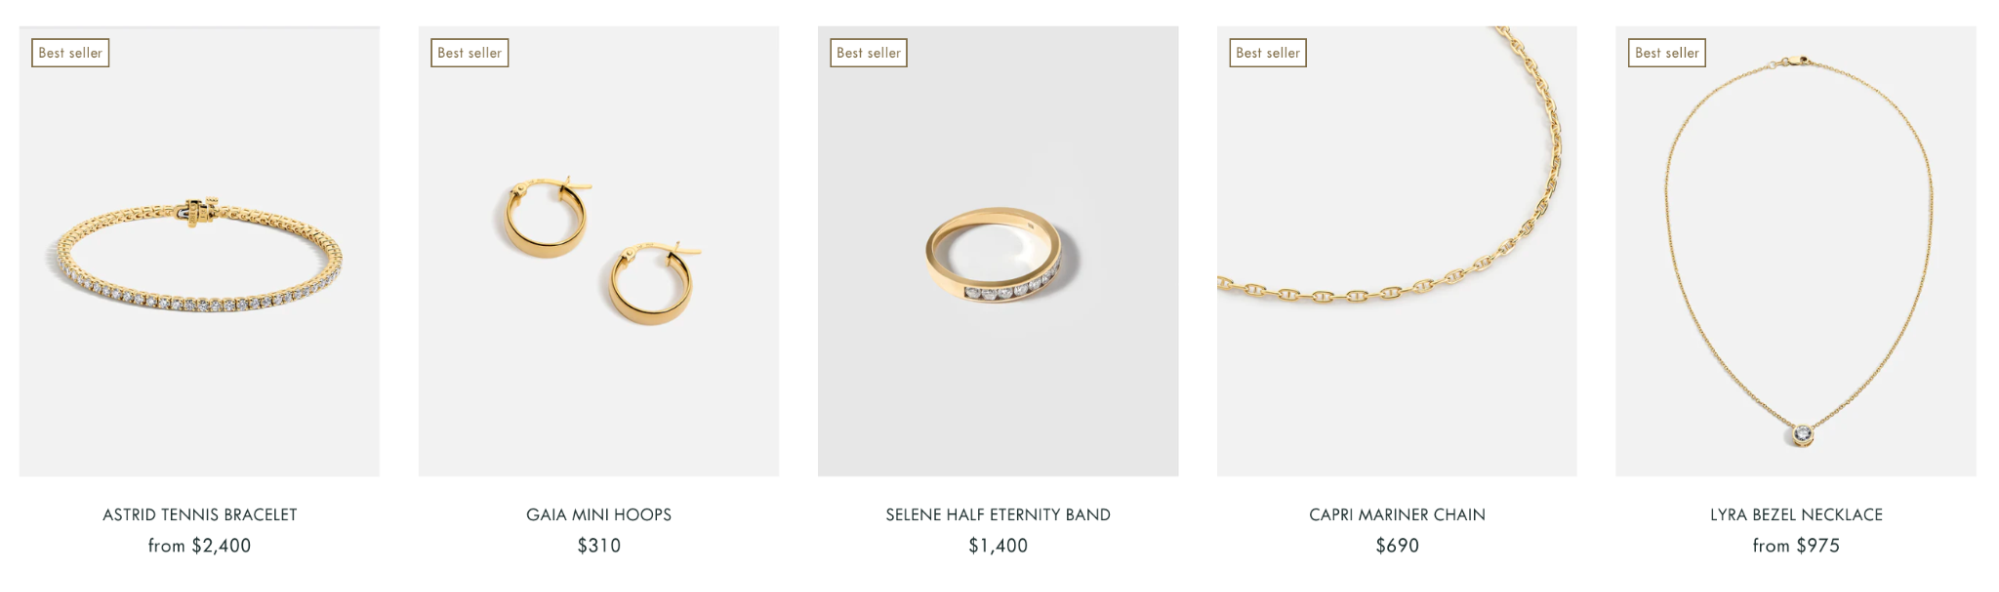 Elegant ROEN jewelry product photos with consistent white backgrounds for each product